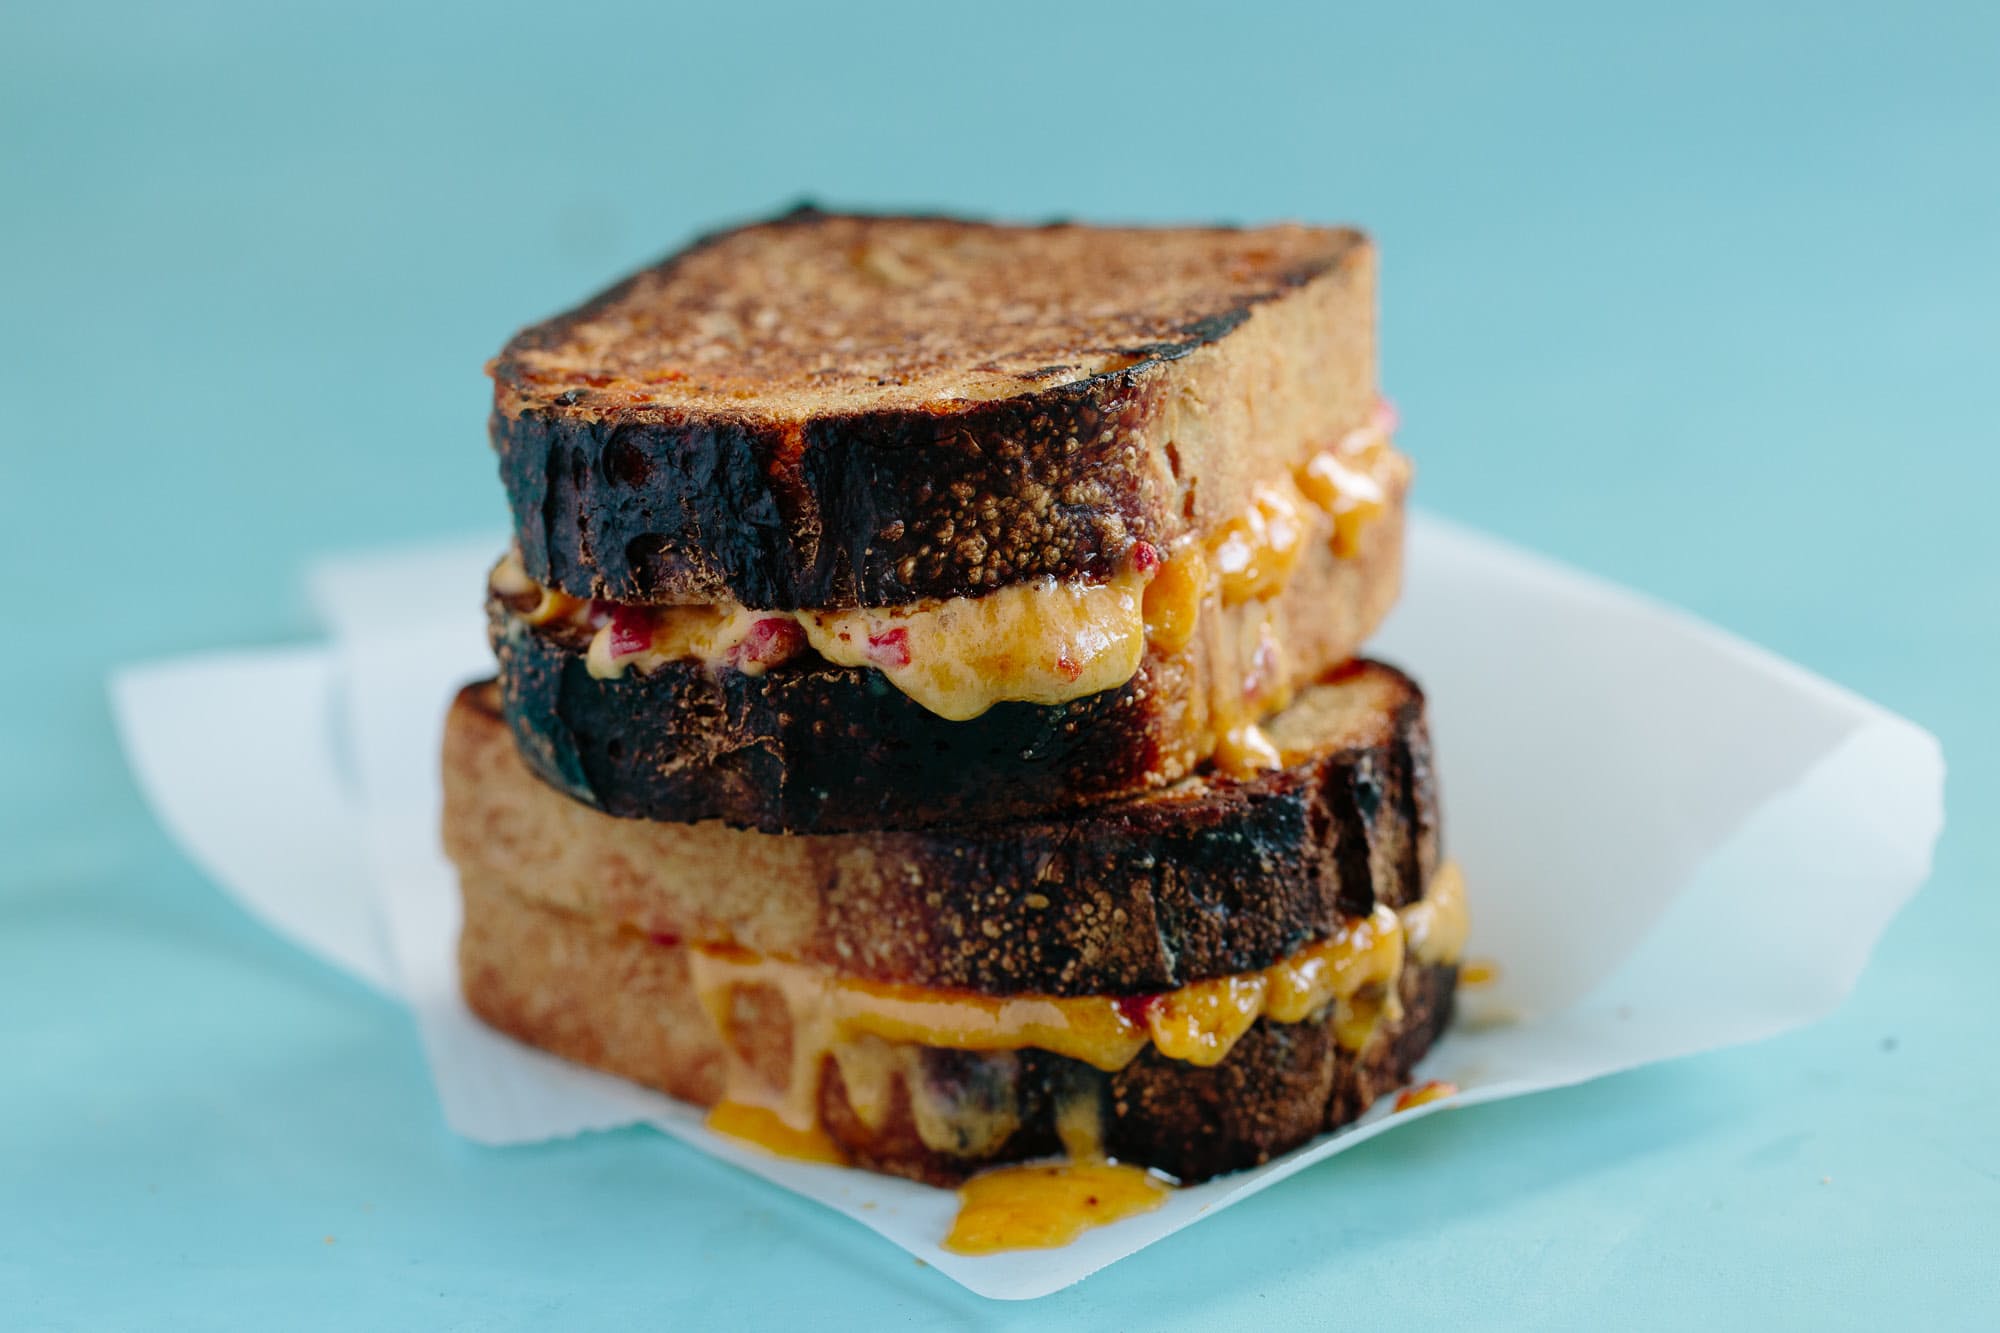 Pimiento Grilled Cheese